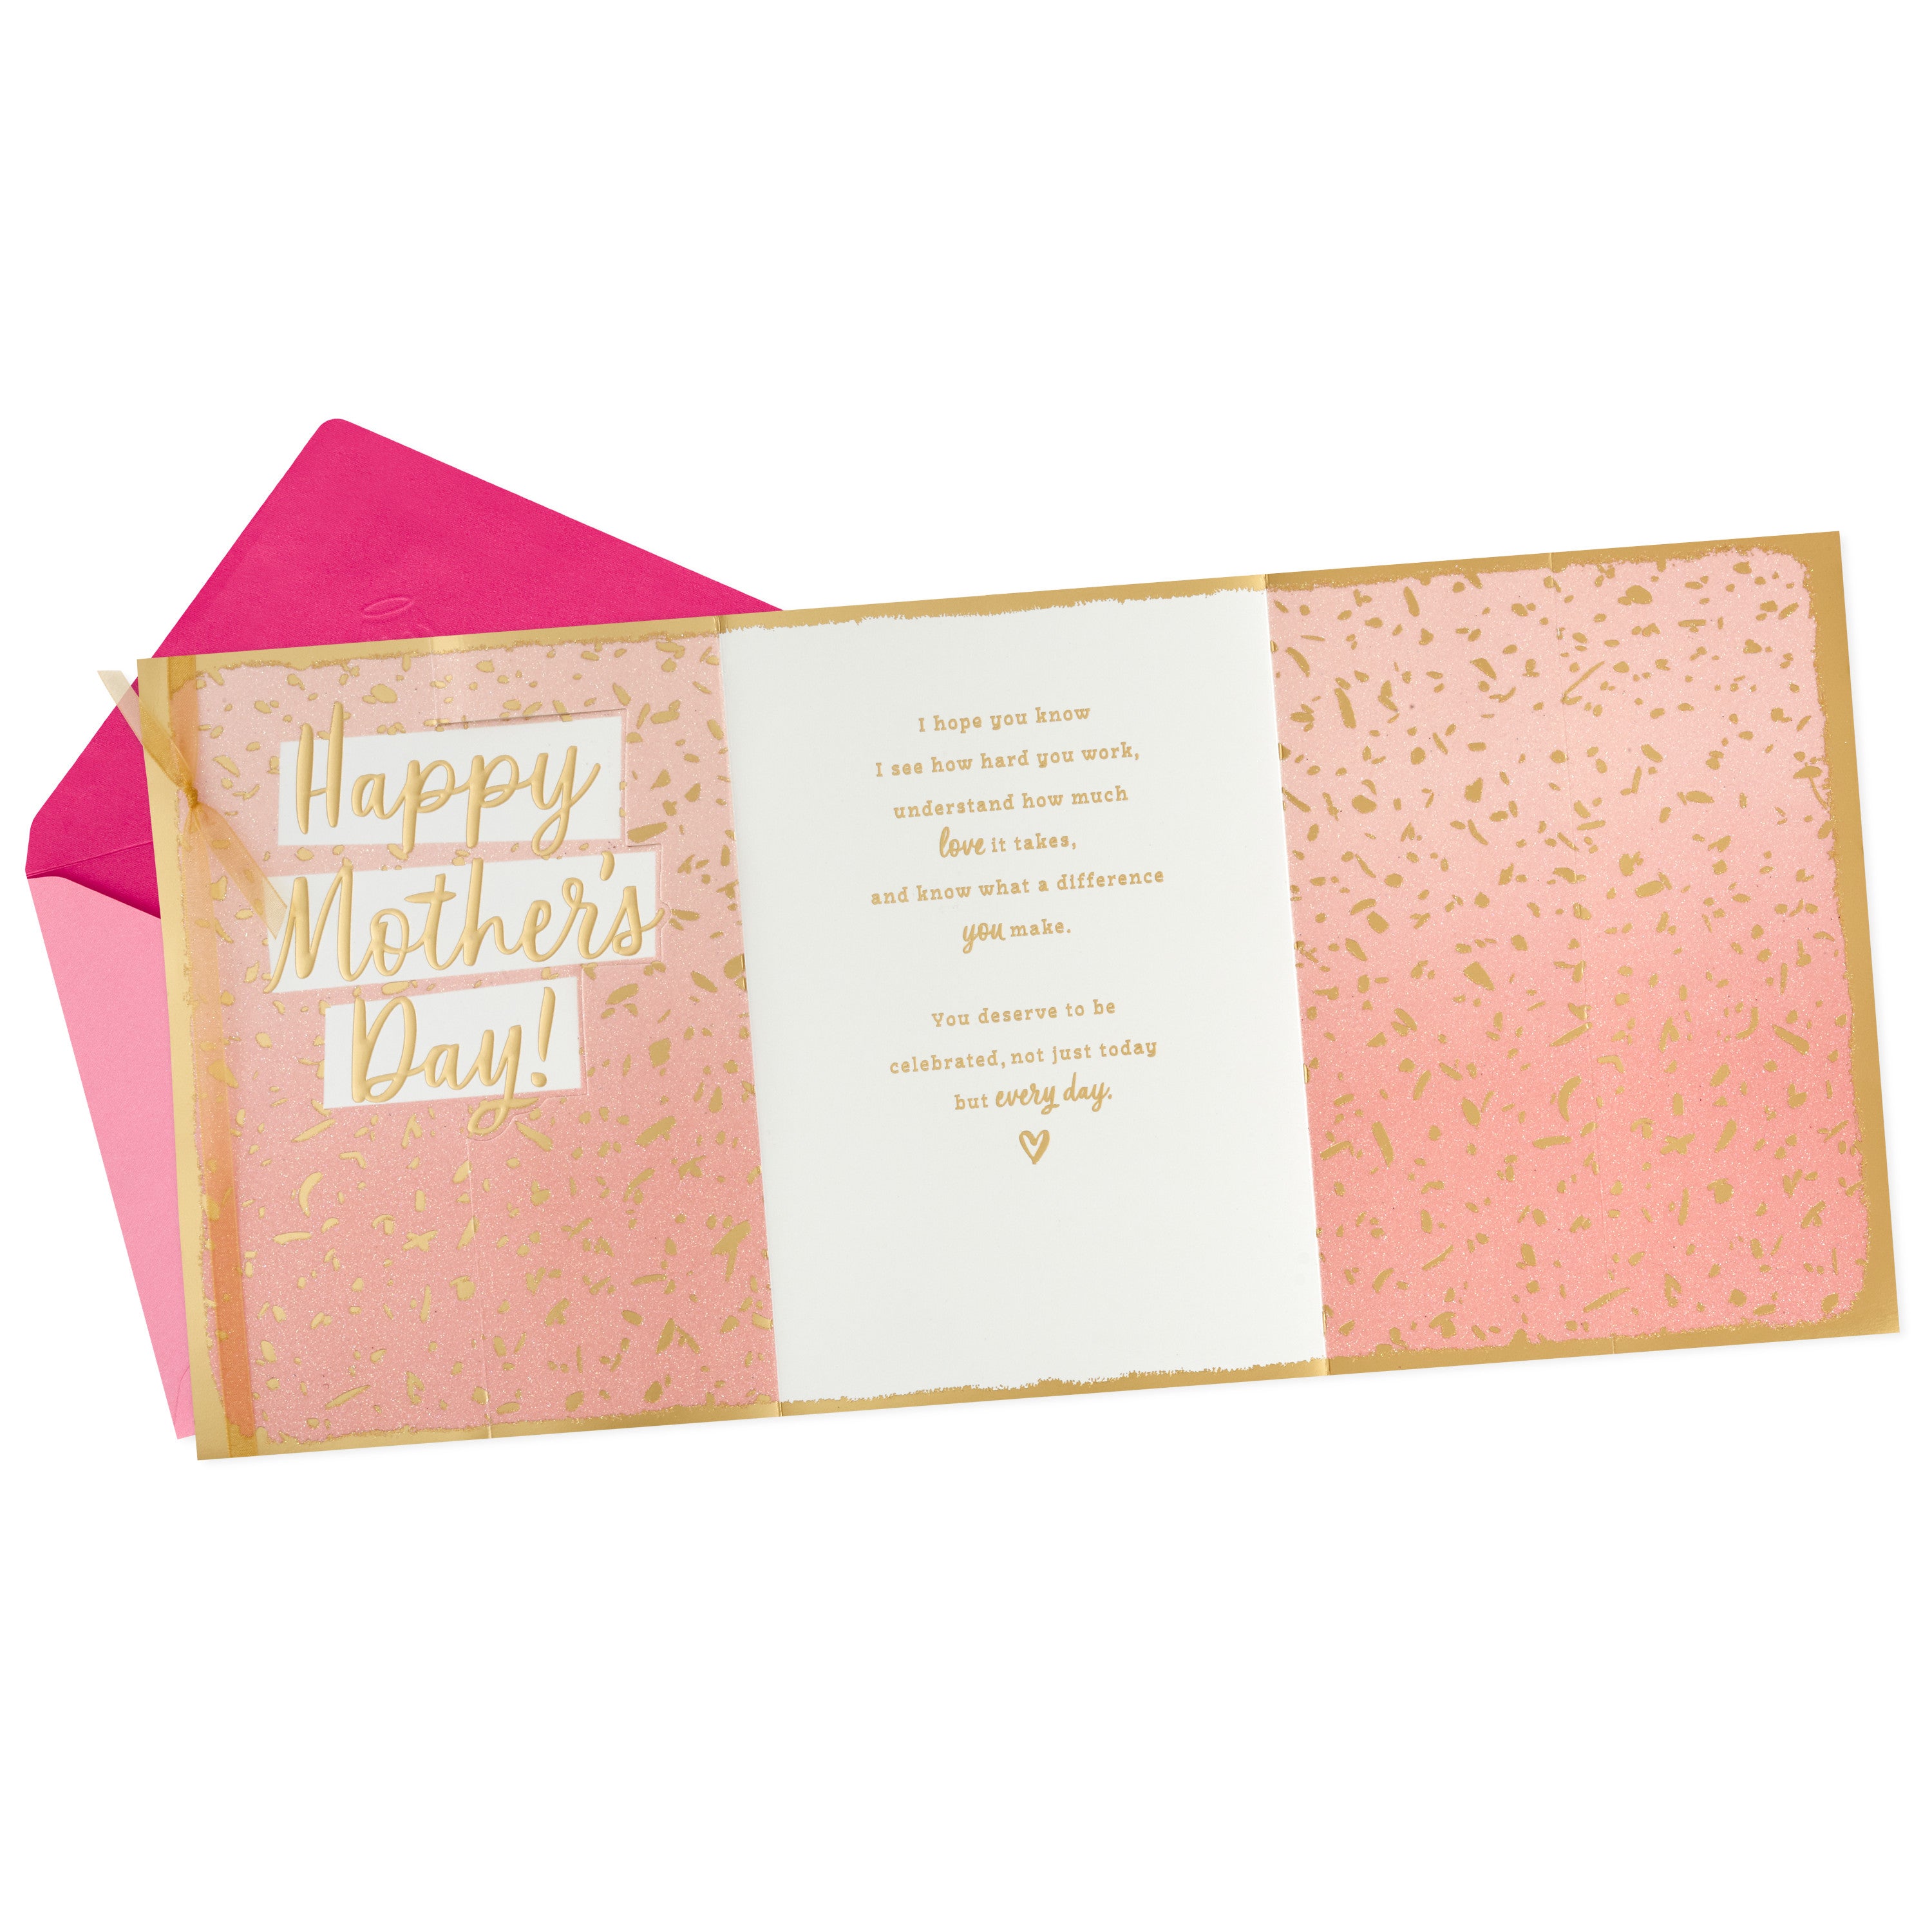 Mothers Day Card (What a Difference You Make)